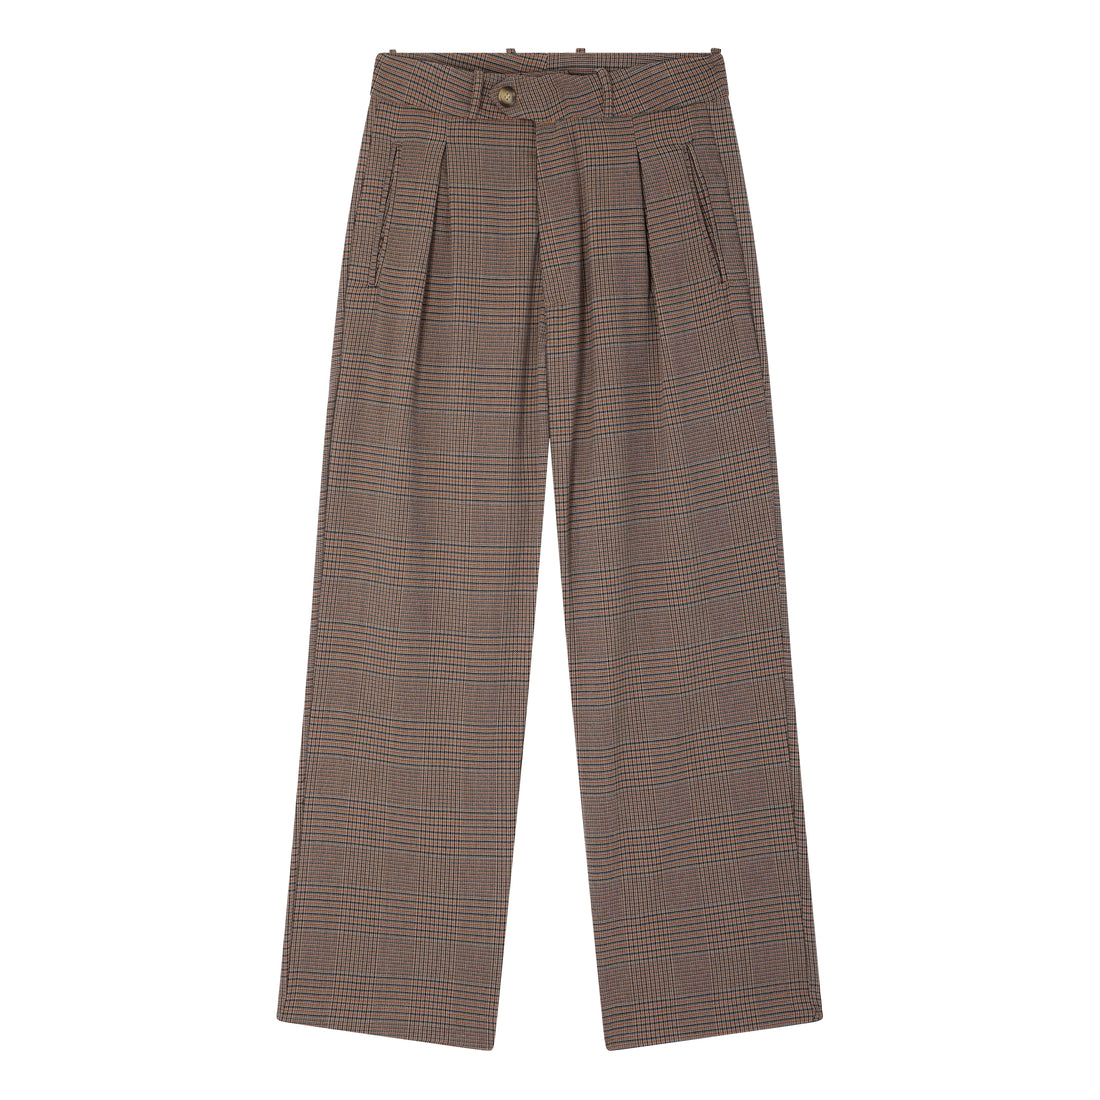 The Brooklyn suit pants